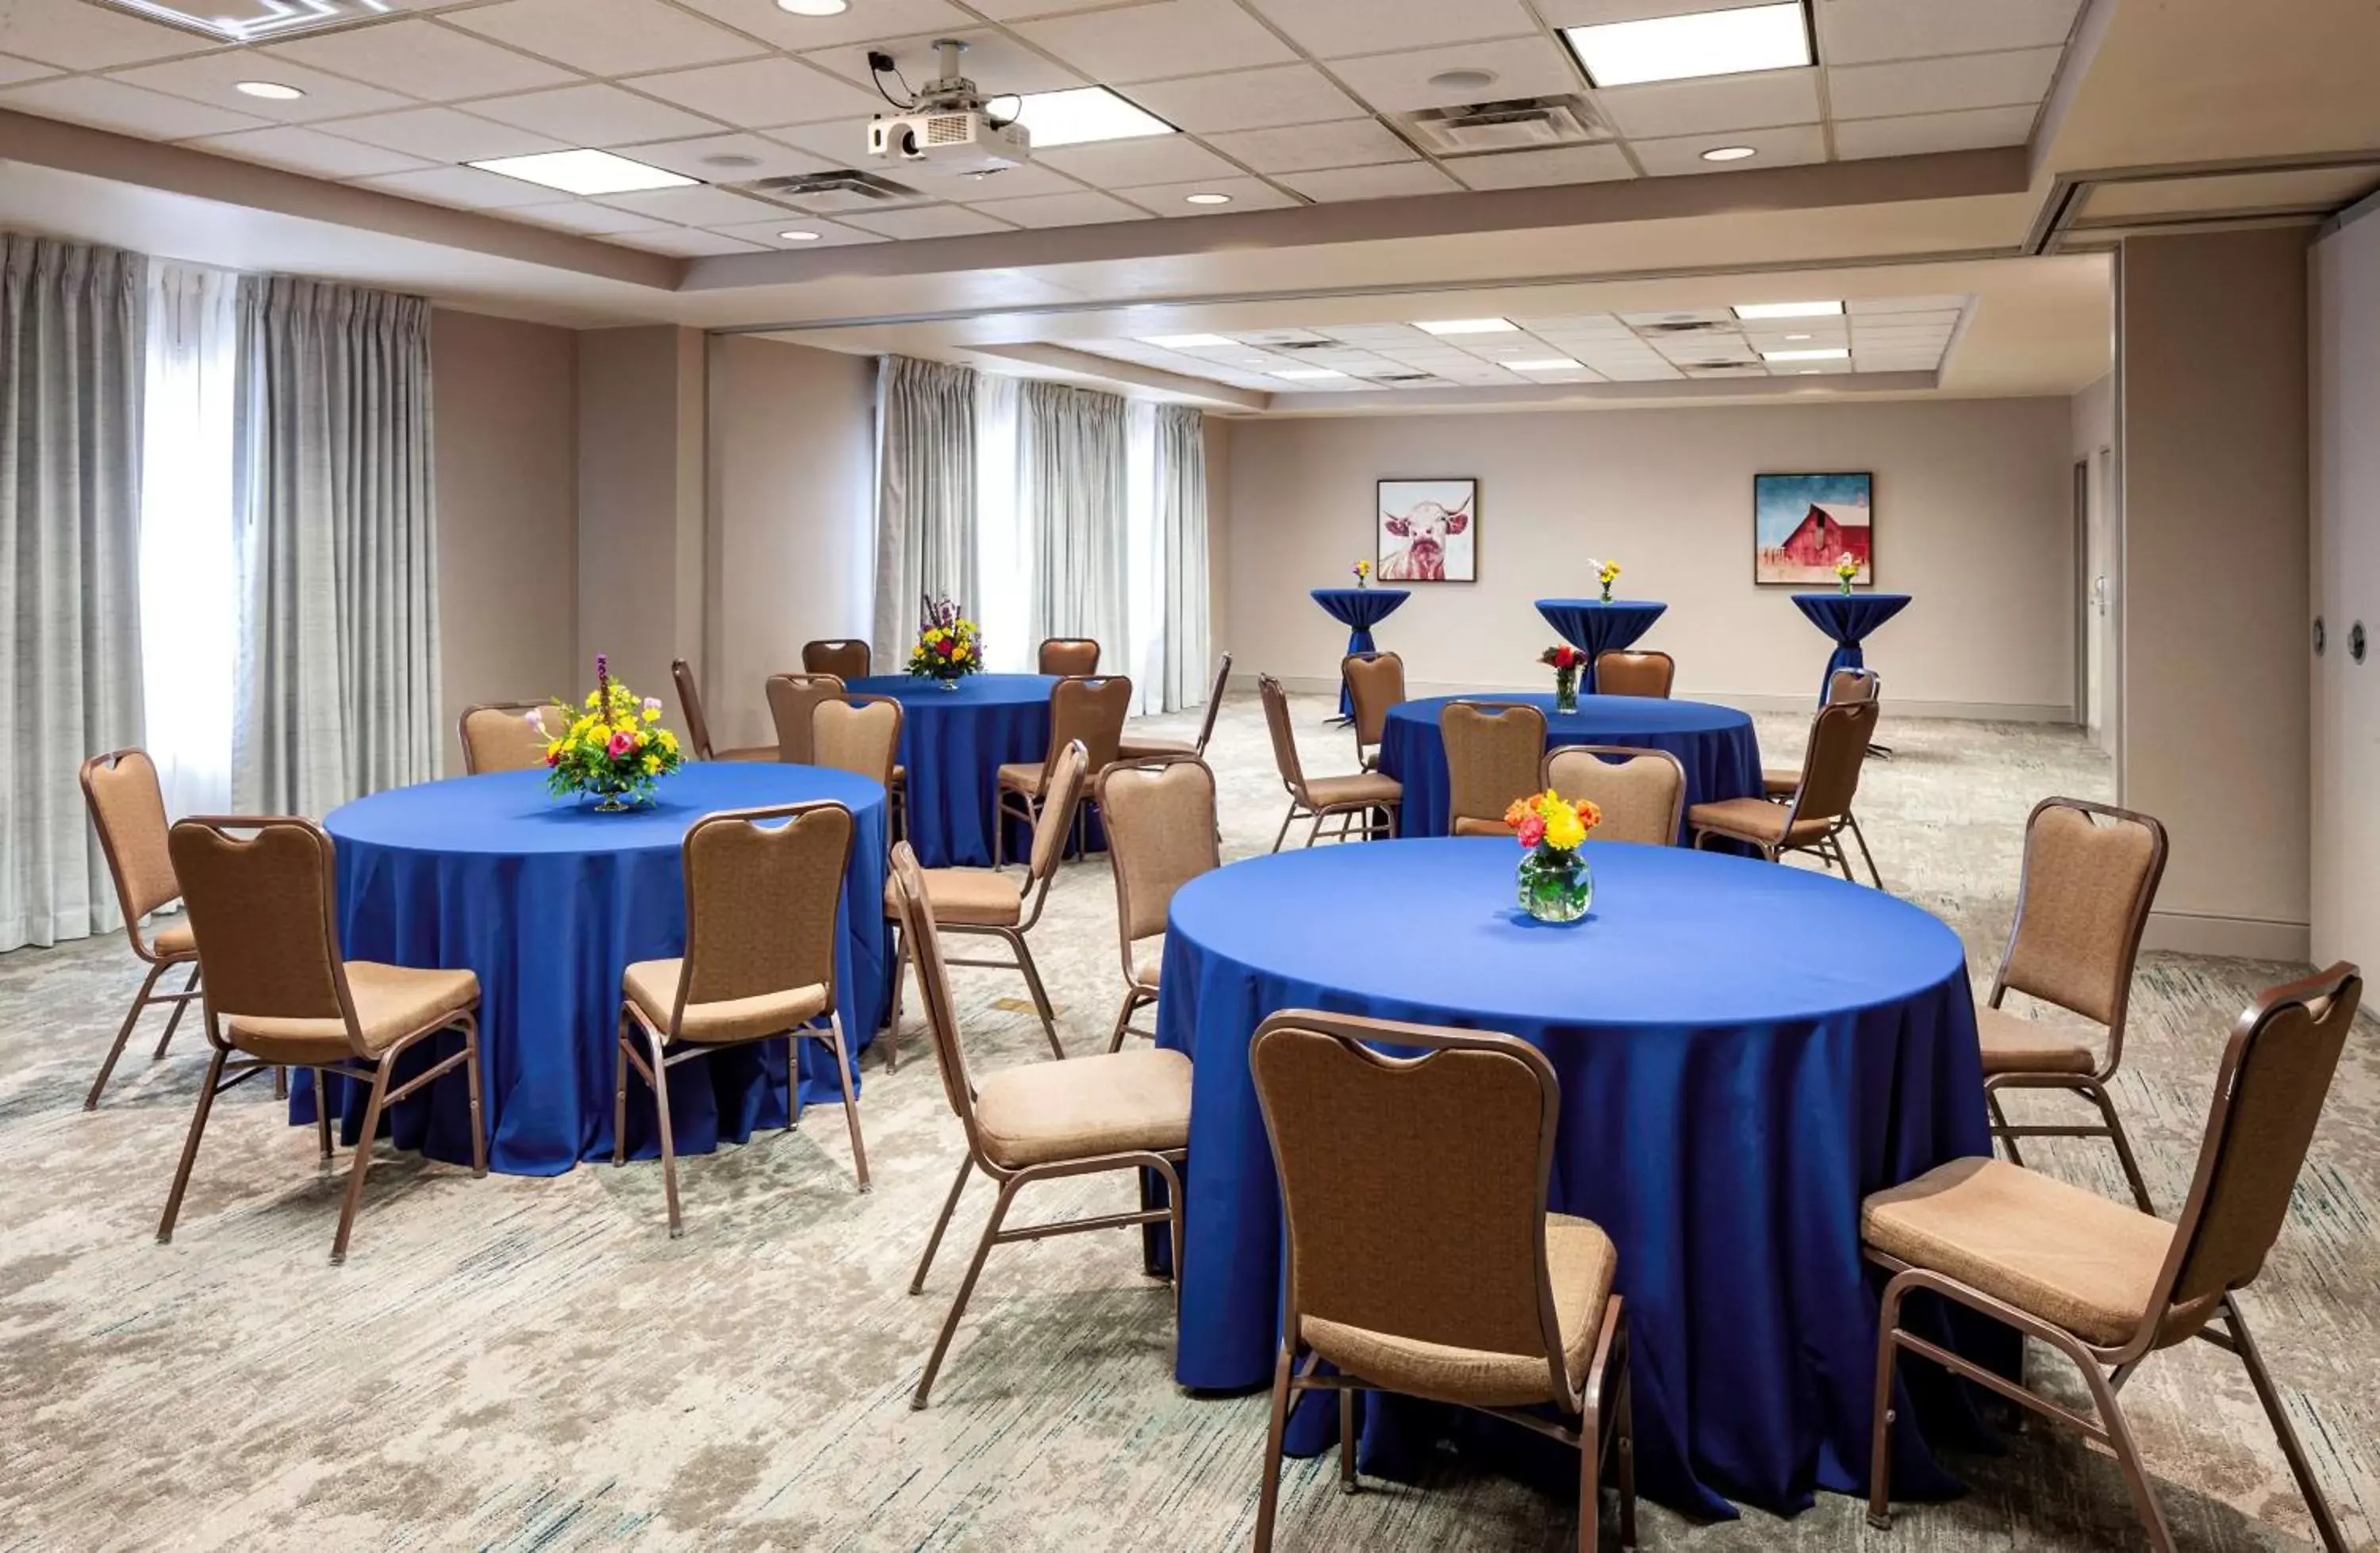 Meeting/conference room, Banquet Facilities in Hilton Garden Inn Omaha Downtown-Old Market Area